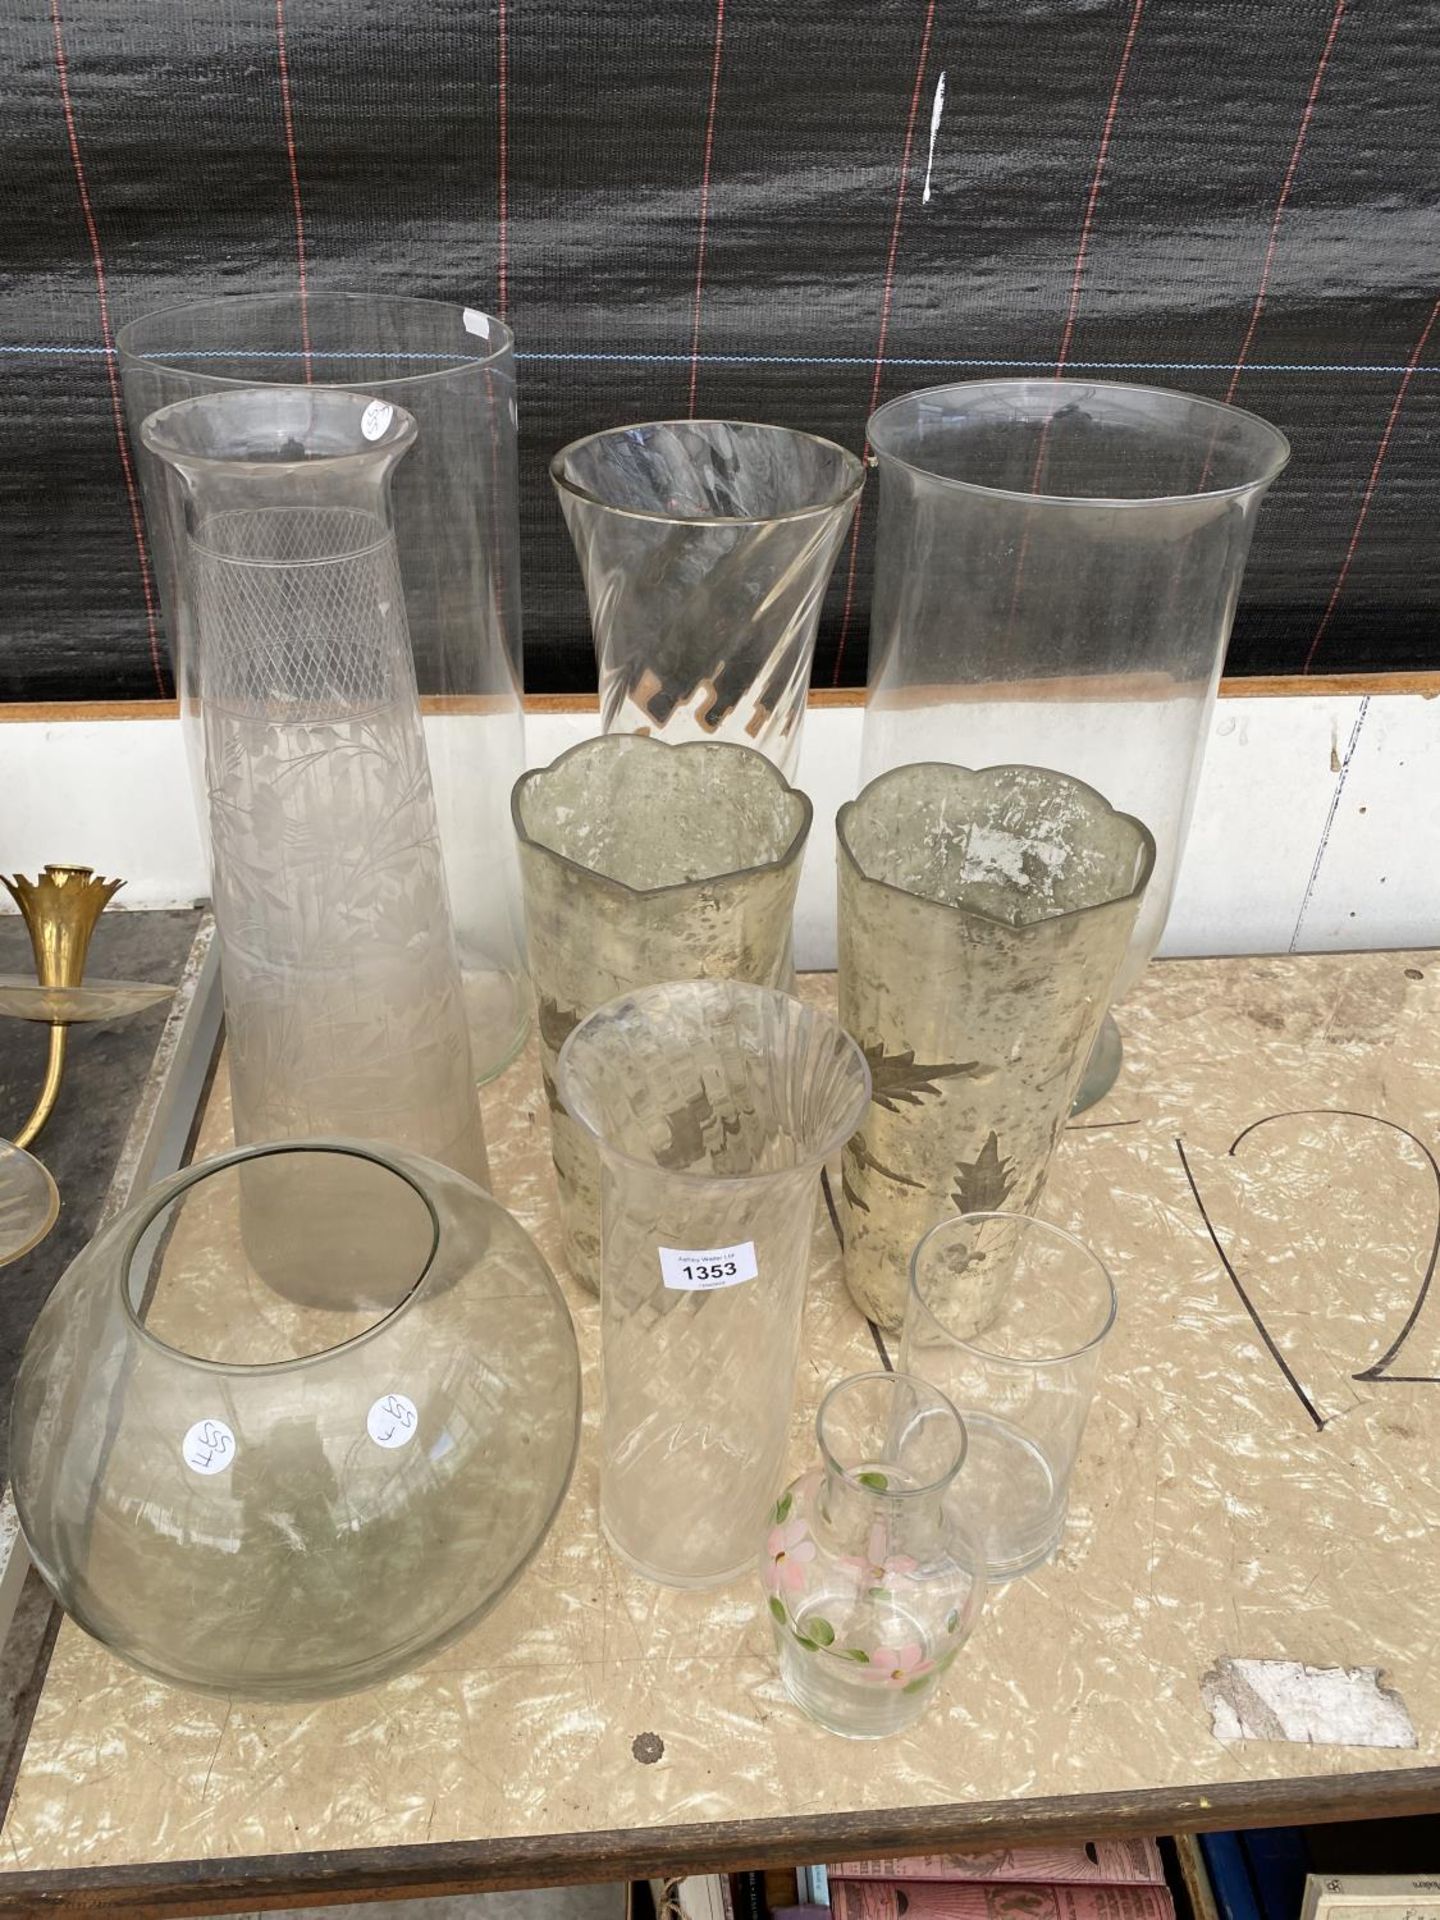 A LARGE ASSORTMENT OF GLASS VASES